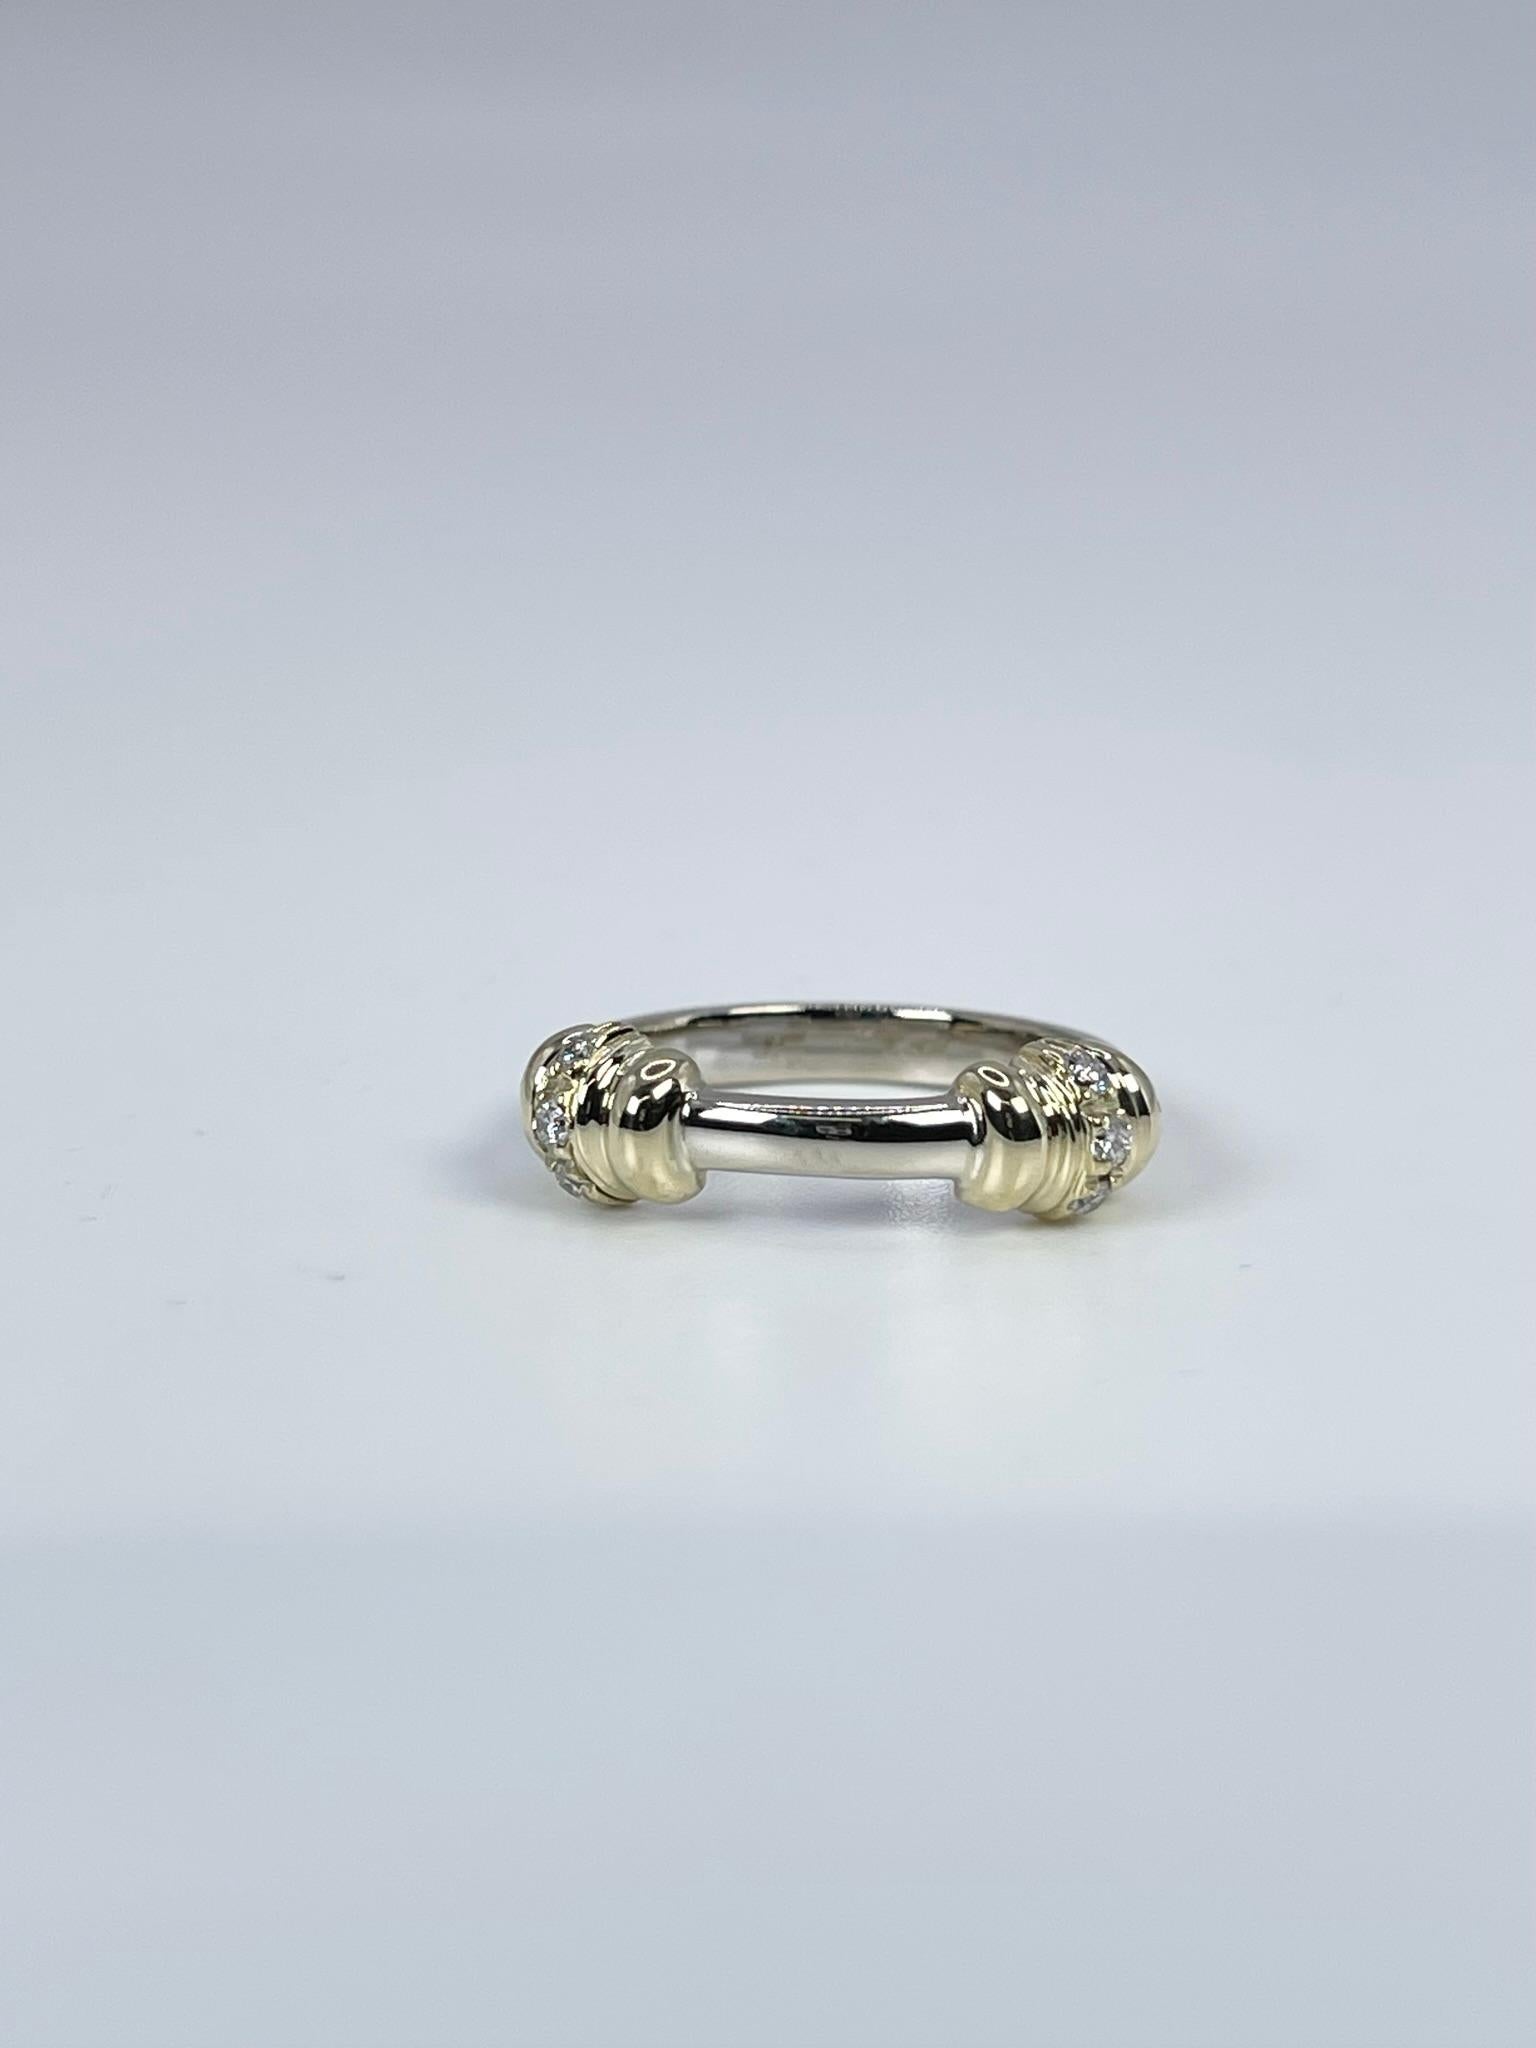 Stunning diamond ring, stacking modern style in 14KT white gold.

GRAM WEIGHT: 4.65gr
GOLD: 14KT white/yellow gold

NATURAL DIAMOND(S)
Cut: Round Brilliant 
Color: G-H (average)
Clarity: SI (average)
Carat: 0.12ct
Size: 7 (can be re-sized)
Item#: